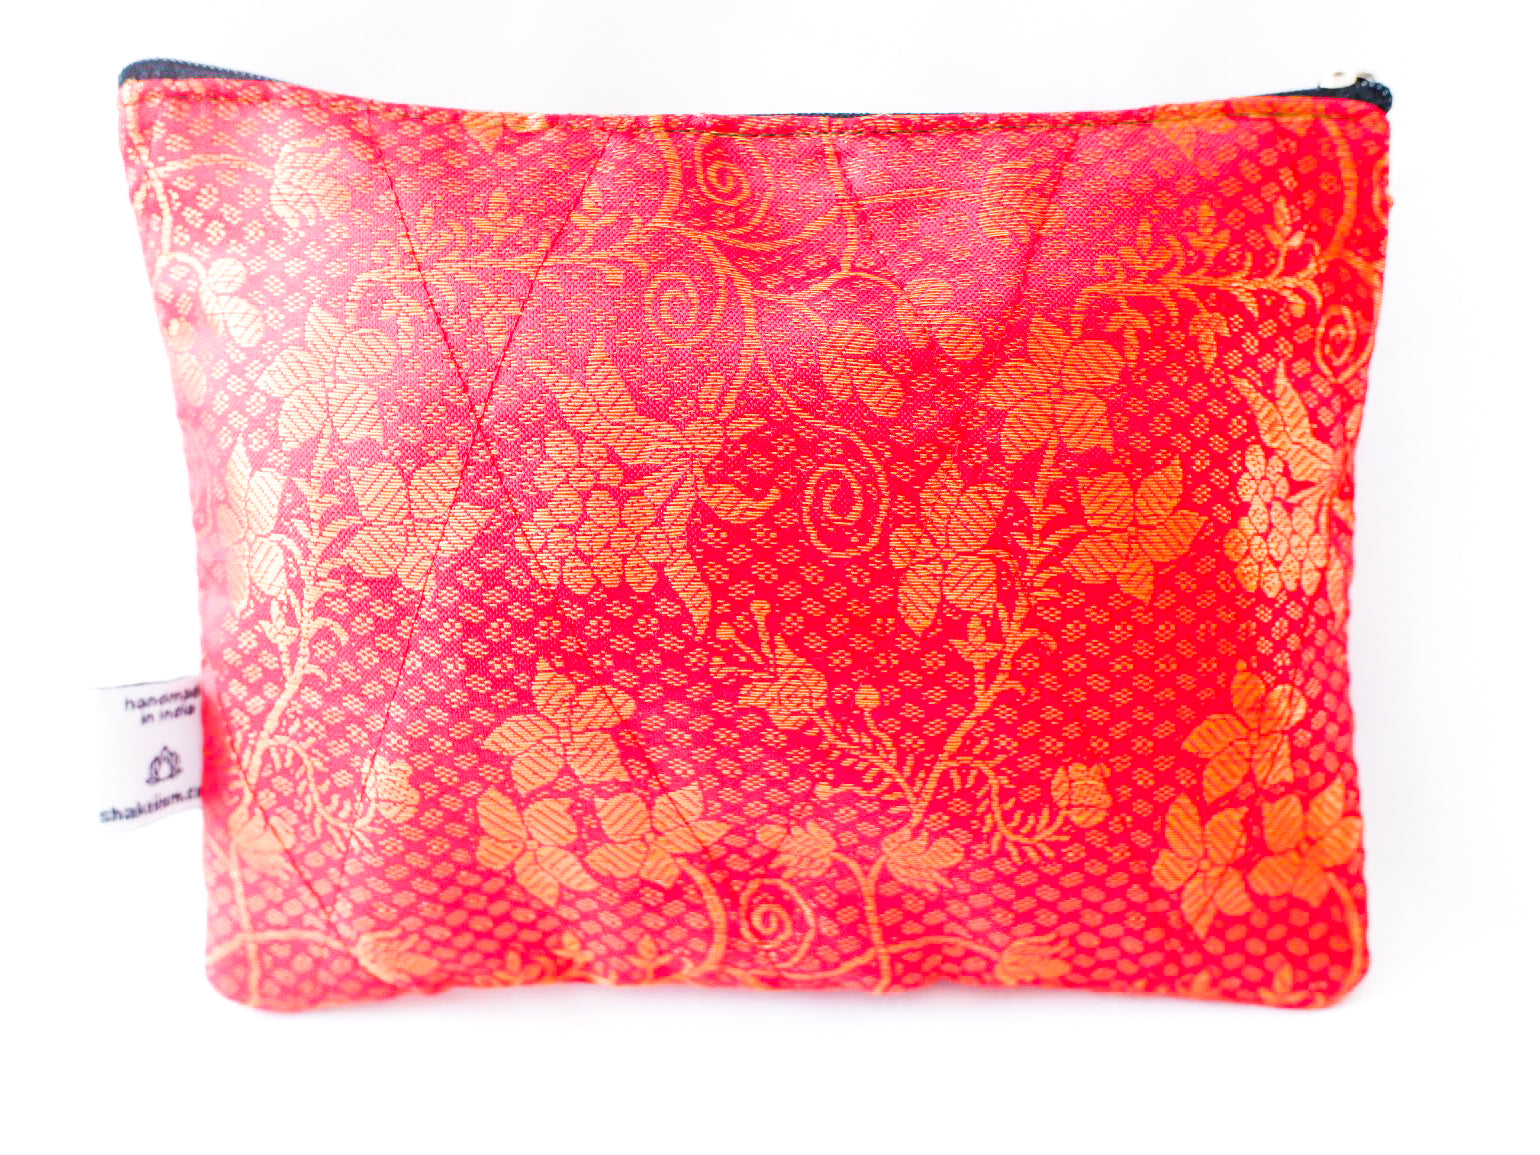 Flat Upcycled Sari Pouch, Large Wallet, Floral Patterns